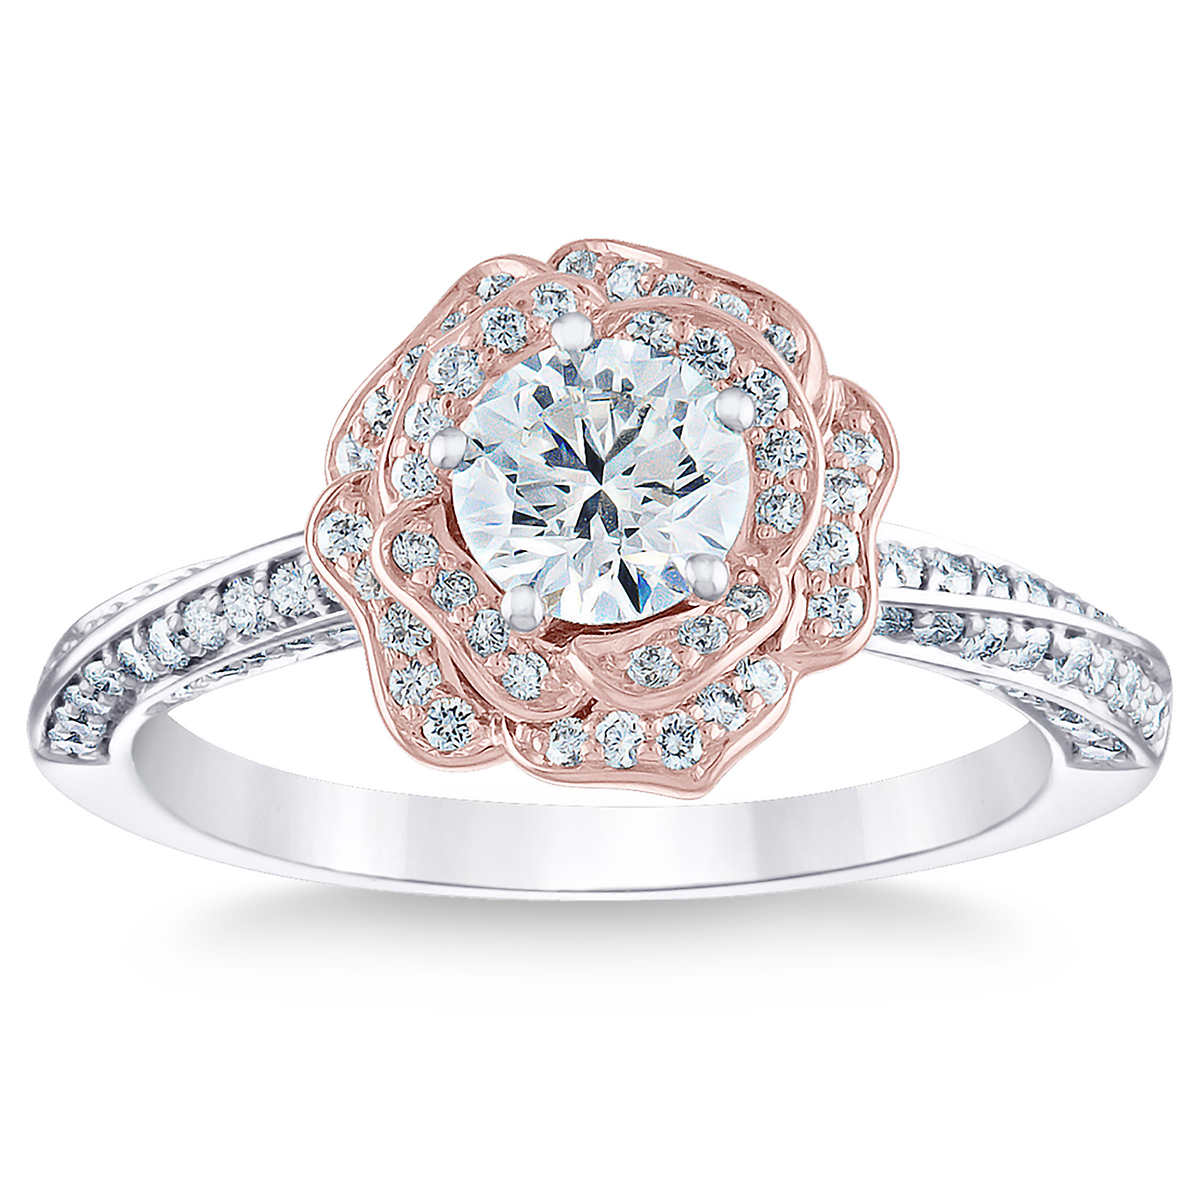 Colour Blossom Mini Sun Ring, Pink Gold And Diamonds - Categories